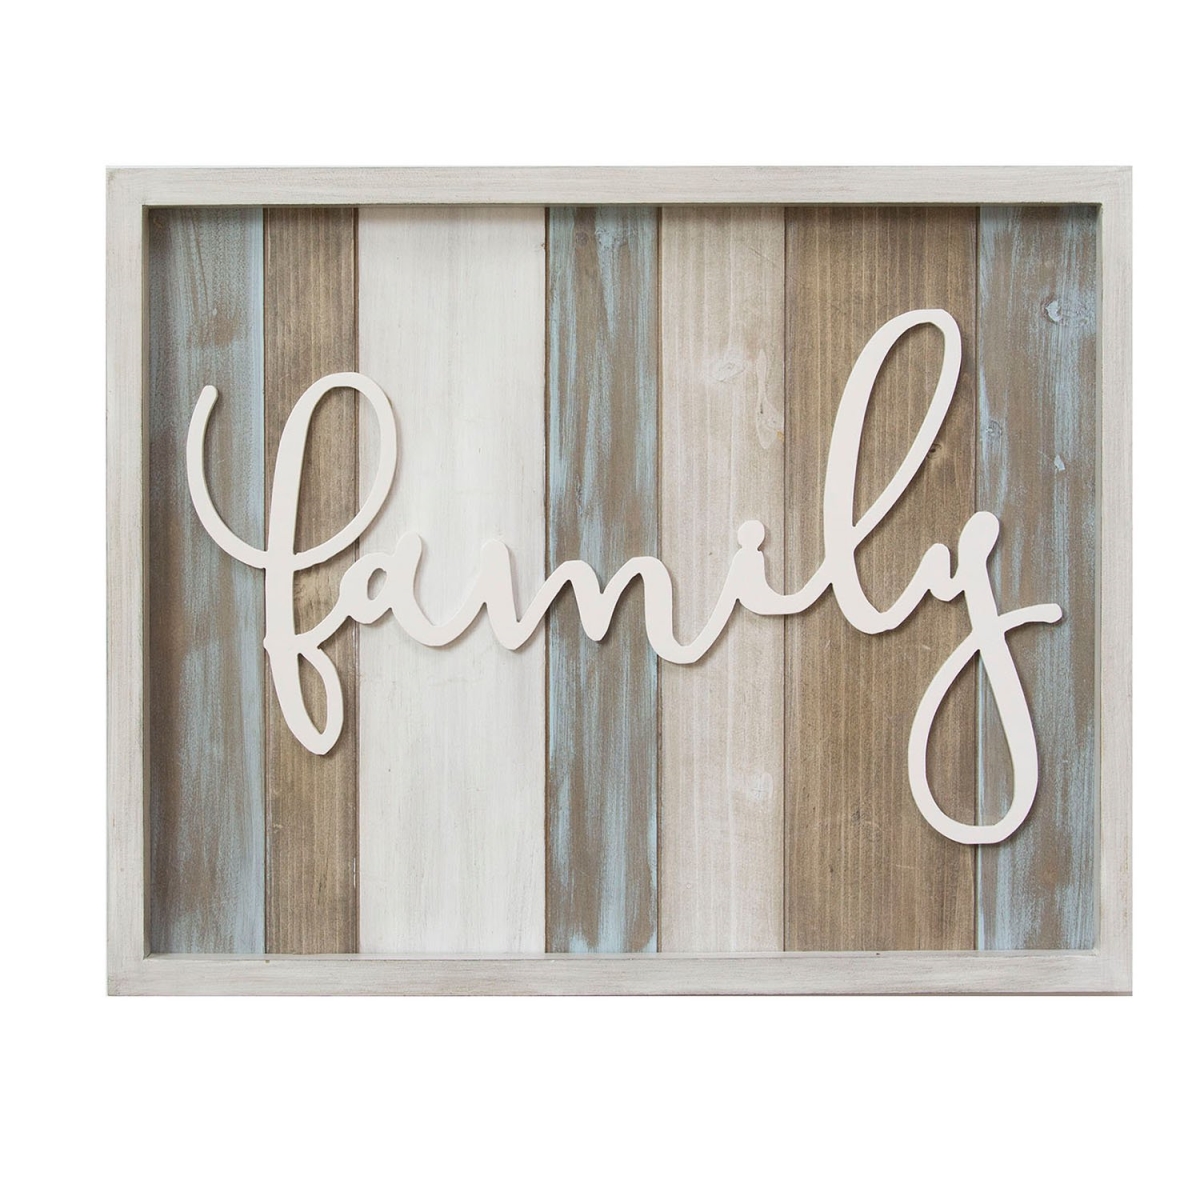 Home Roots 321194 Rustic Family Wood Wall Decor, Multicolor